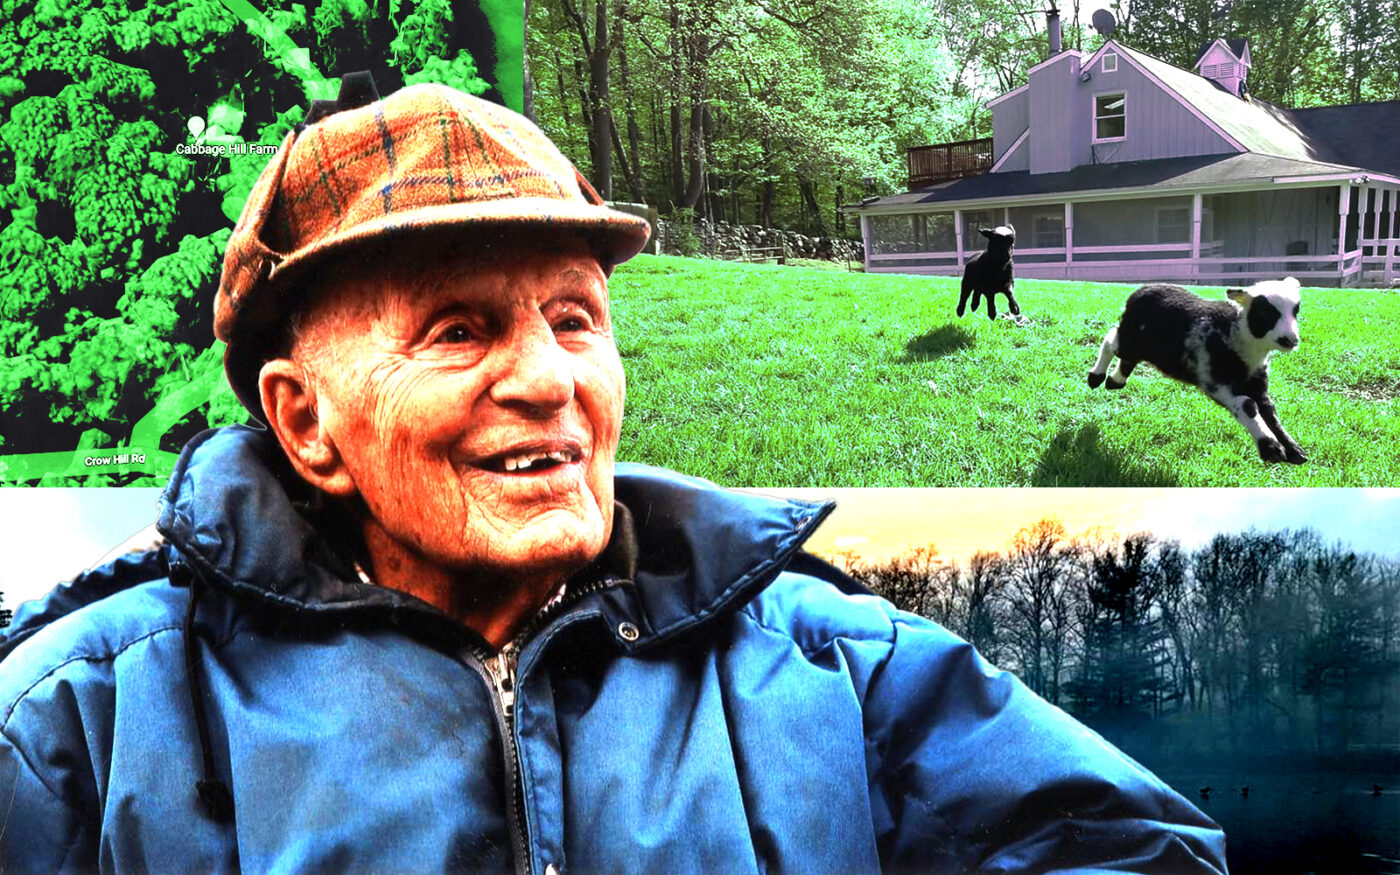 A photo illustration of late KKR co-founder Jerome Kohlberg and Cabbage Hill Farm at 115 Crow Hill Road in Mount Kisco (Kohlberg Foundation, Instagram/Cabbage Hill Farm, Google Maps)